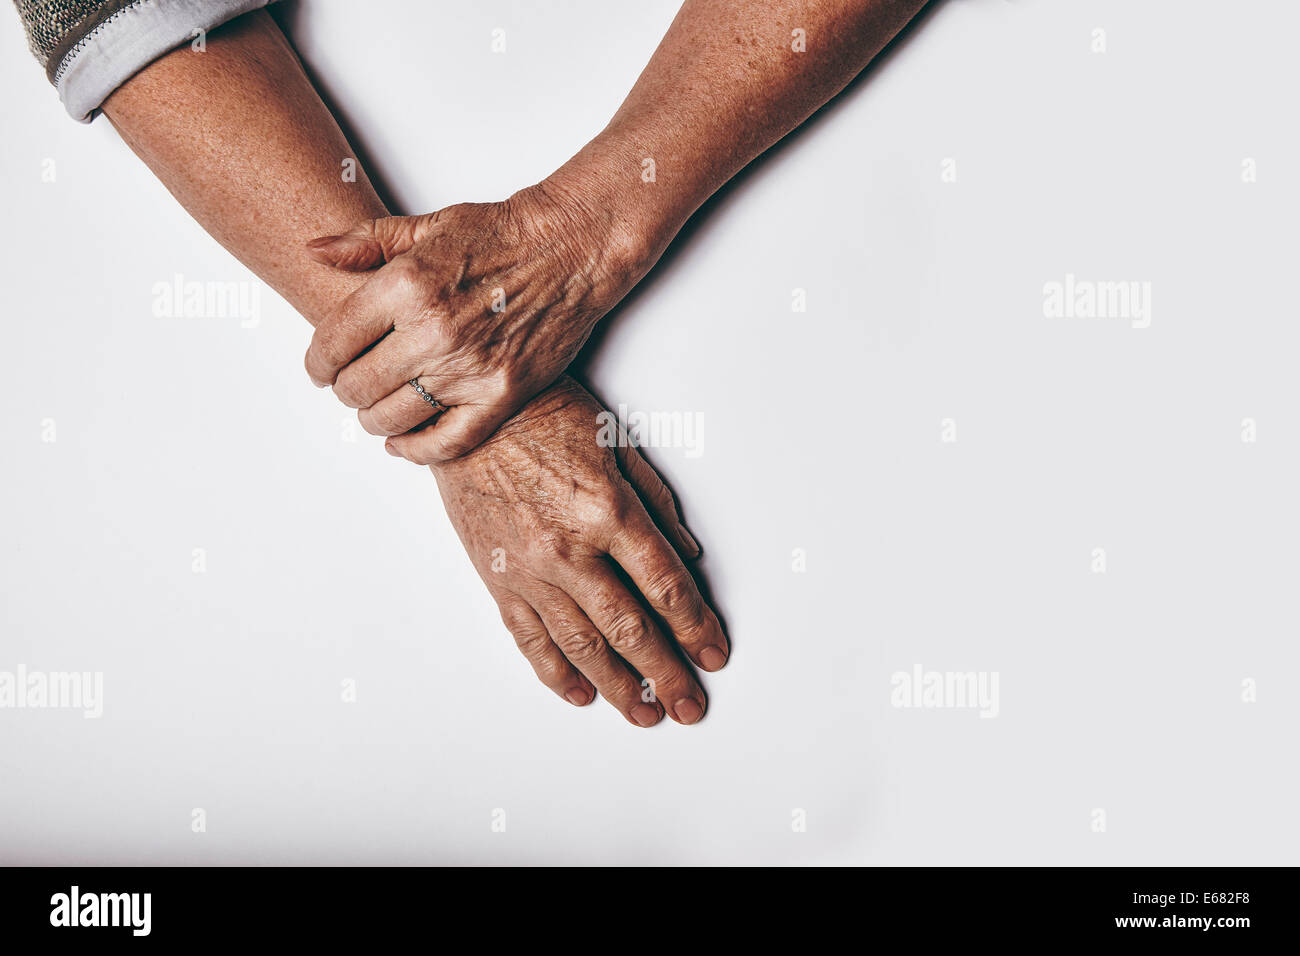 Top view of an elderly woman's hands resting on grey background. Relaxed old female hands together. Stock Photo